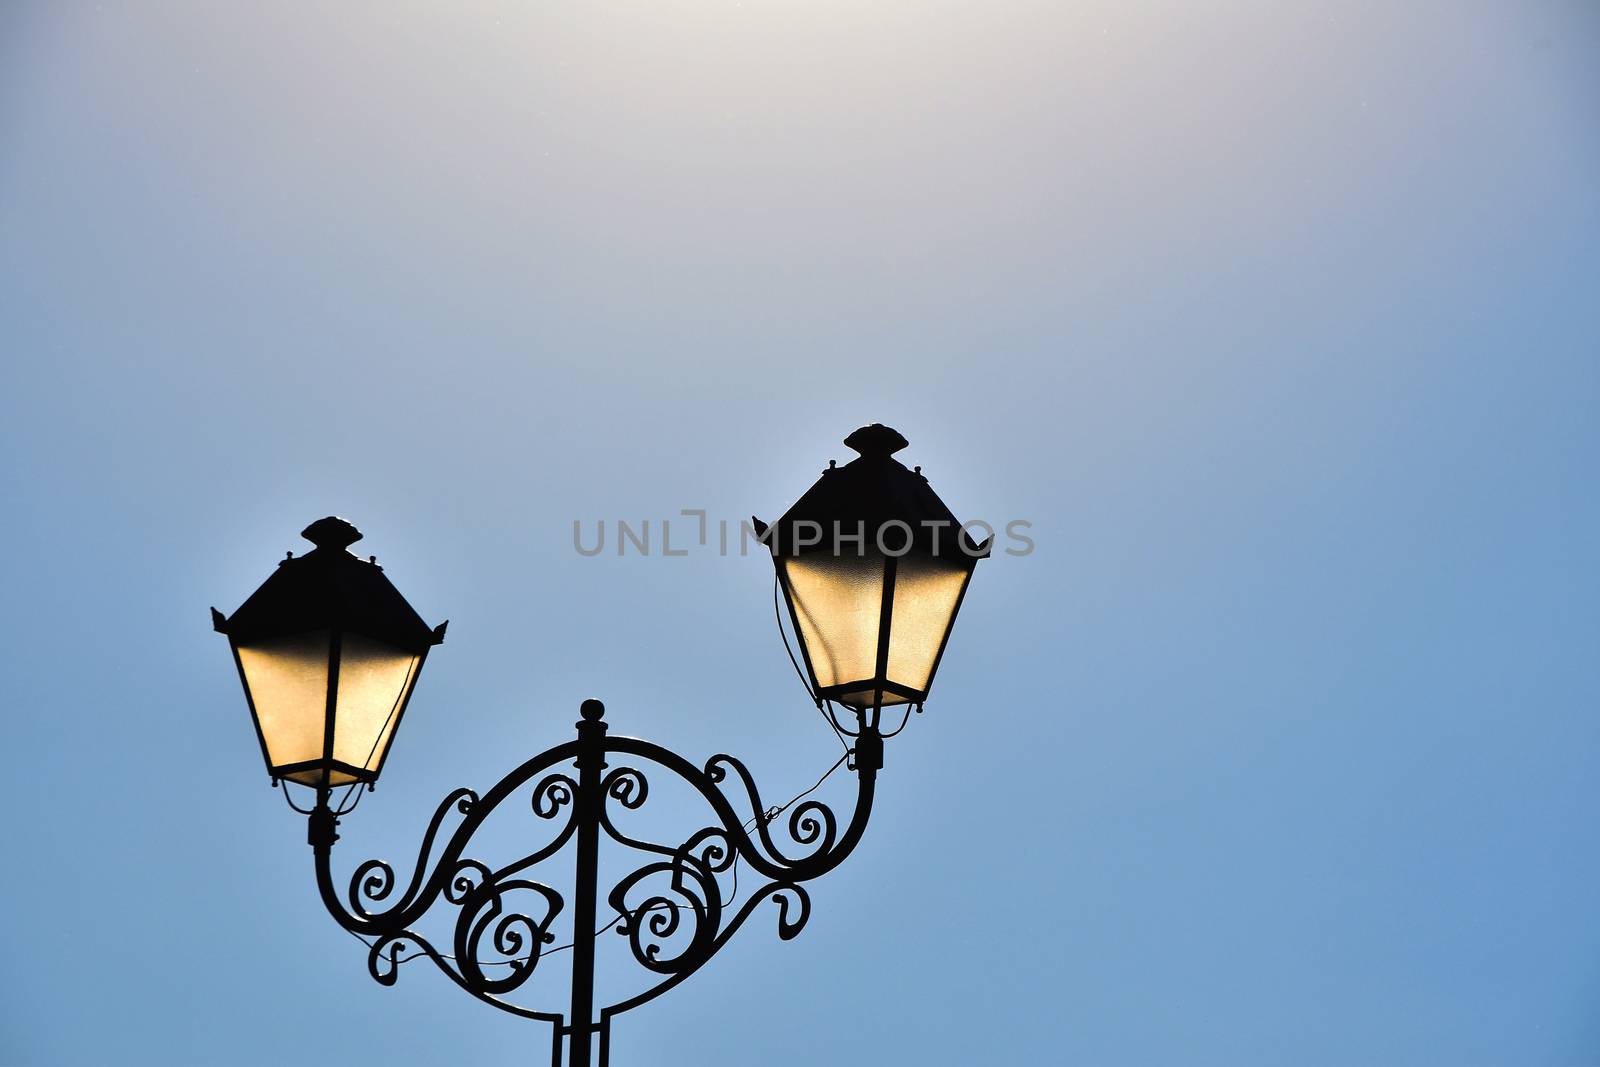 Street antique style double lamp post with effect of shine at late day blue sky background